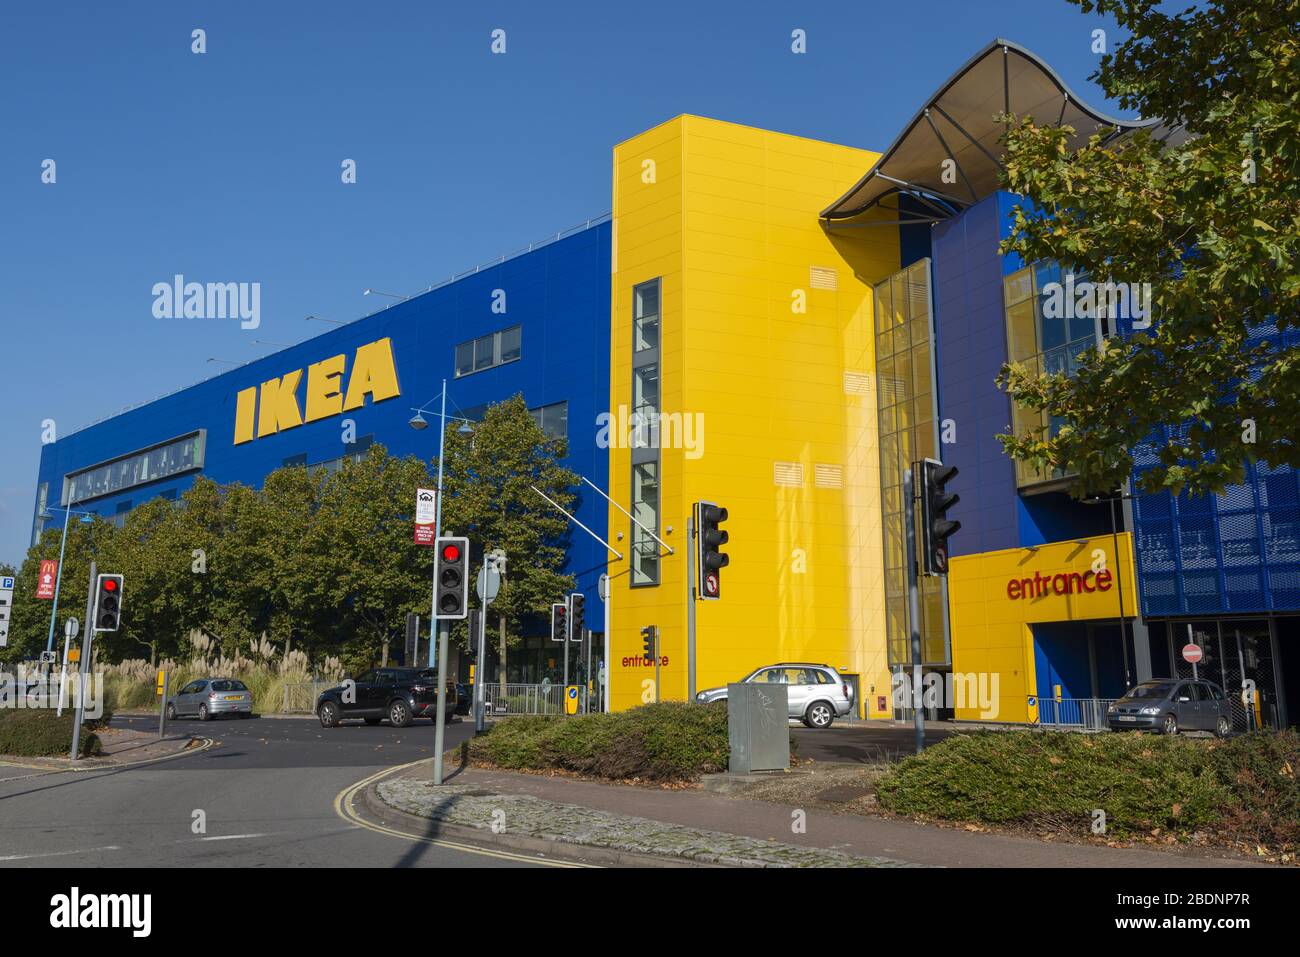 The exterior of the Ikea furniture store at West Quay retail park in Southampton, Hampshire, England, UK Stock Photo